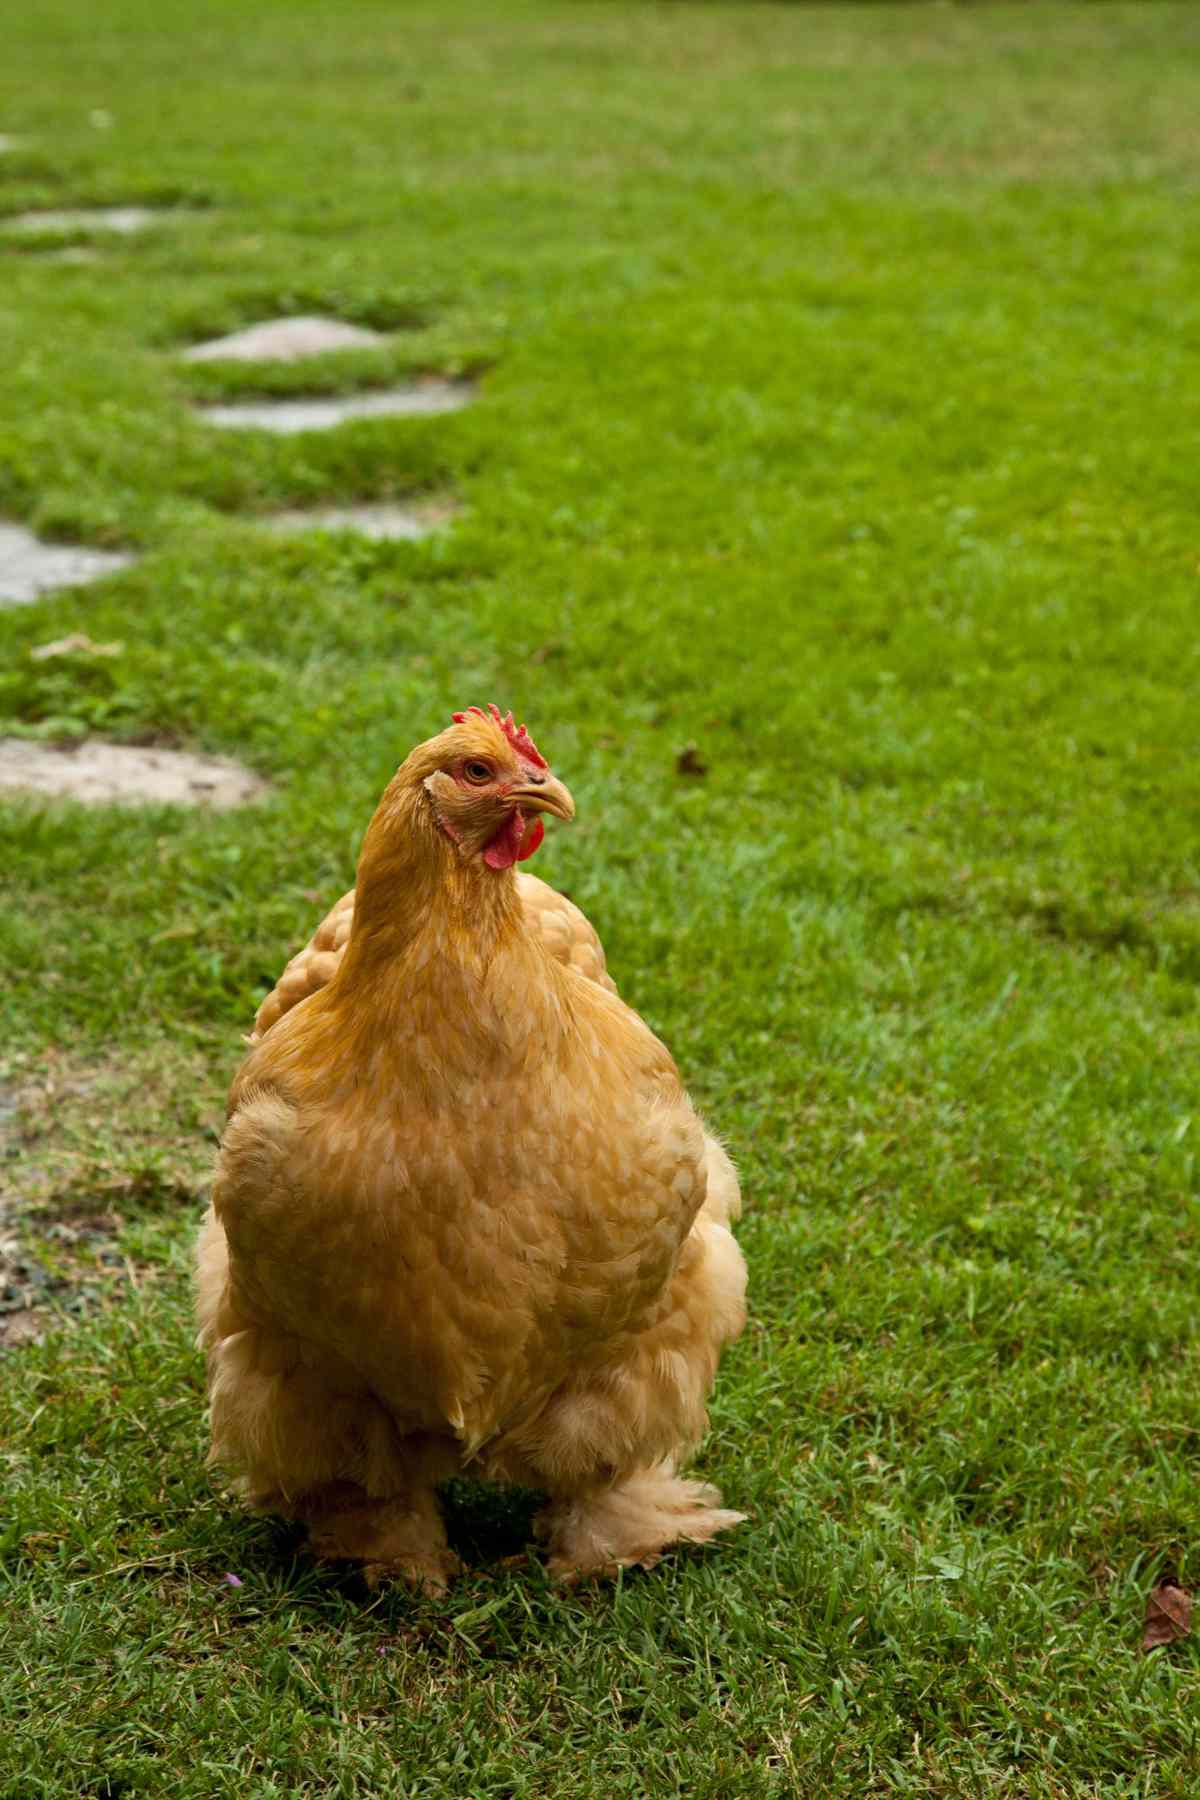 Slate Hill Farm. Puopolo farmhouse. Close-up of chicken walking on grounds outside of house.